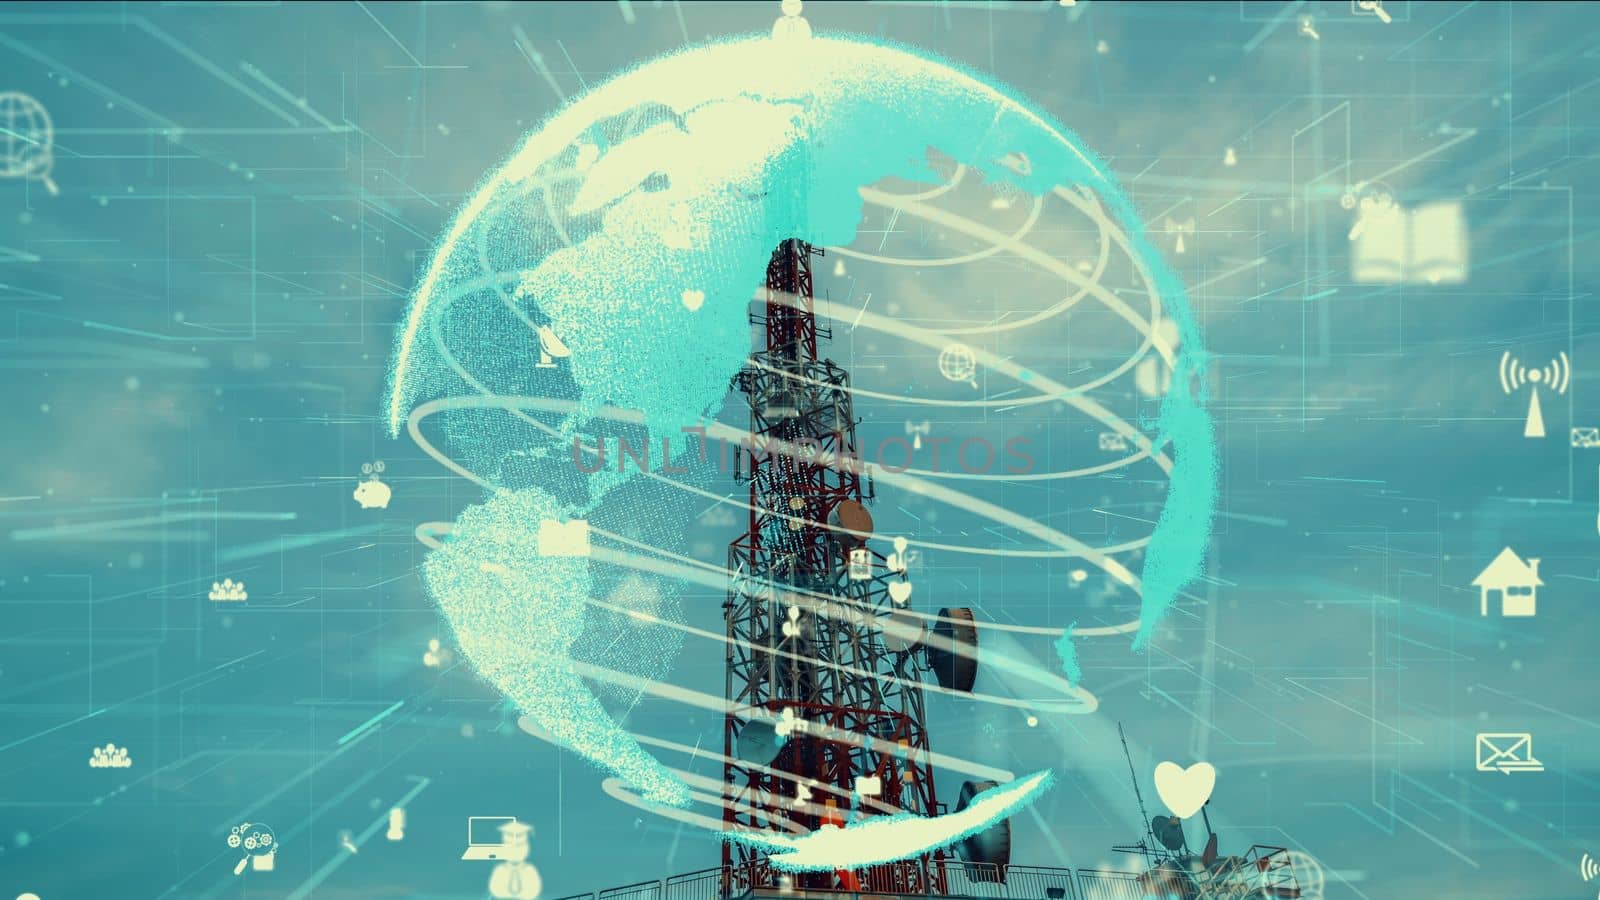 Telecommunication tower with 3D graphic of global business alteration and e-commerce against blue sky in concept of worldwide internet network connections .